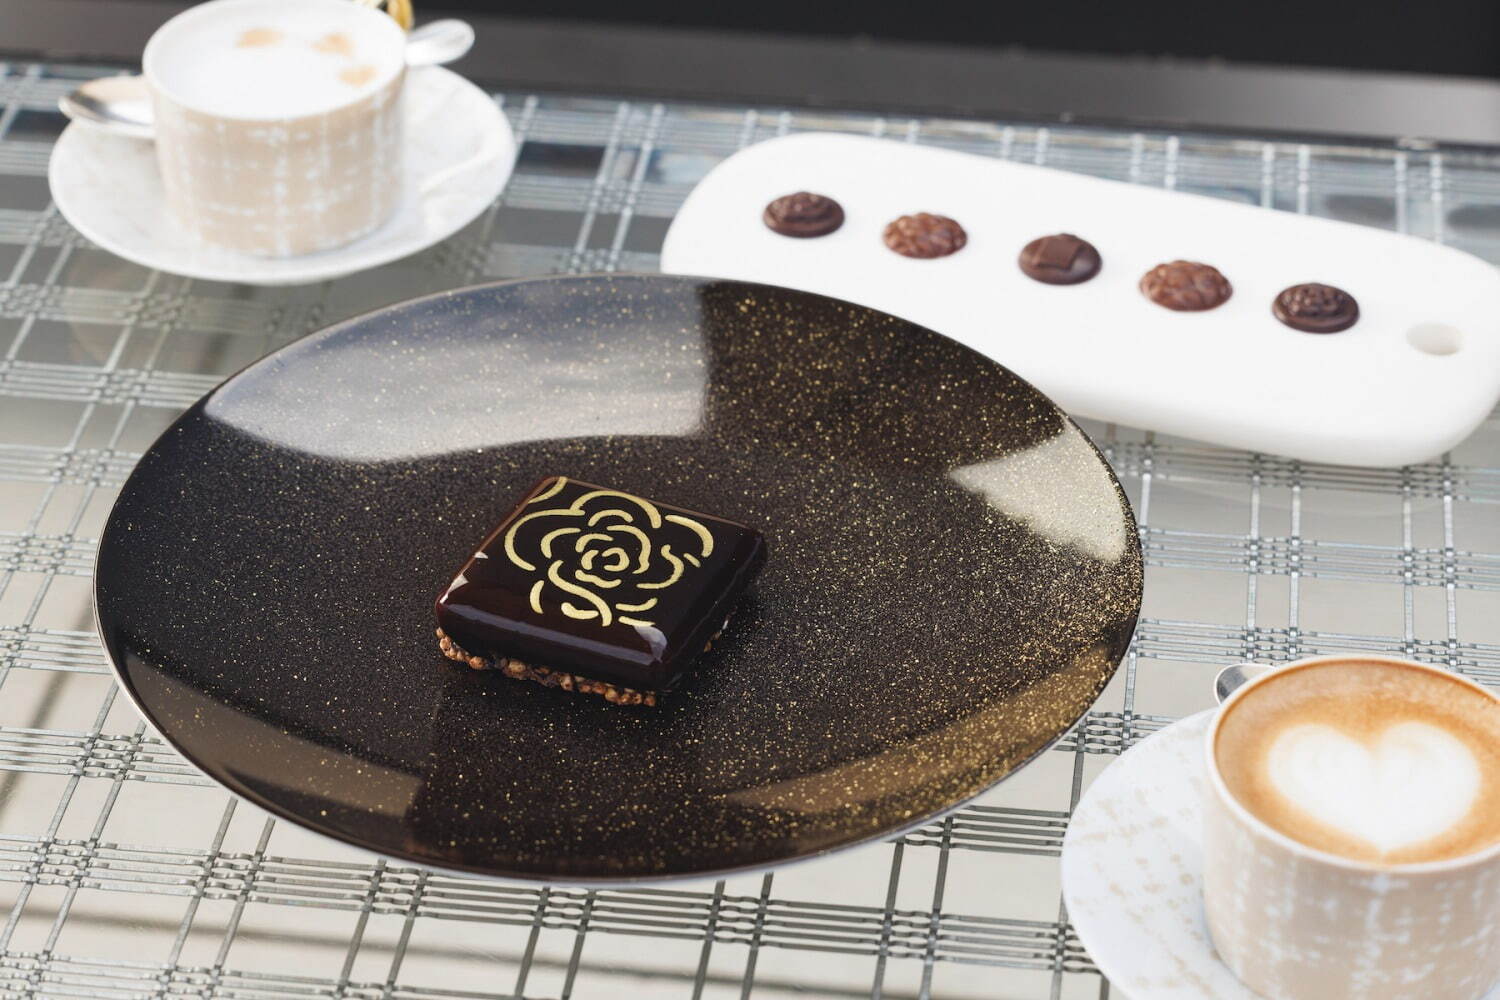 Experience the World of CHANEL Through Dessert at New Ginza Cafe